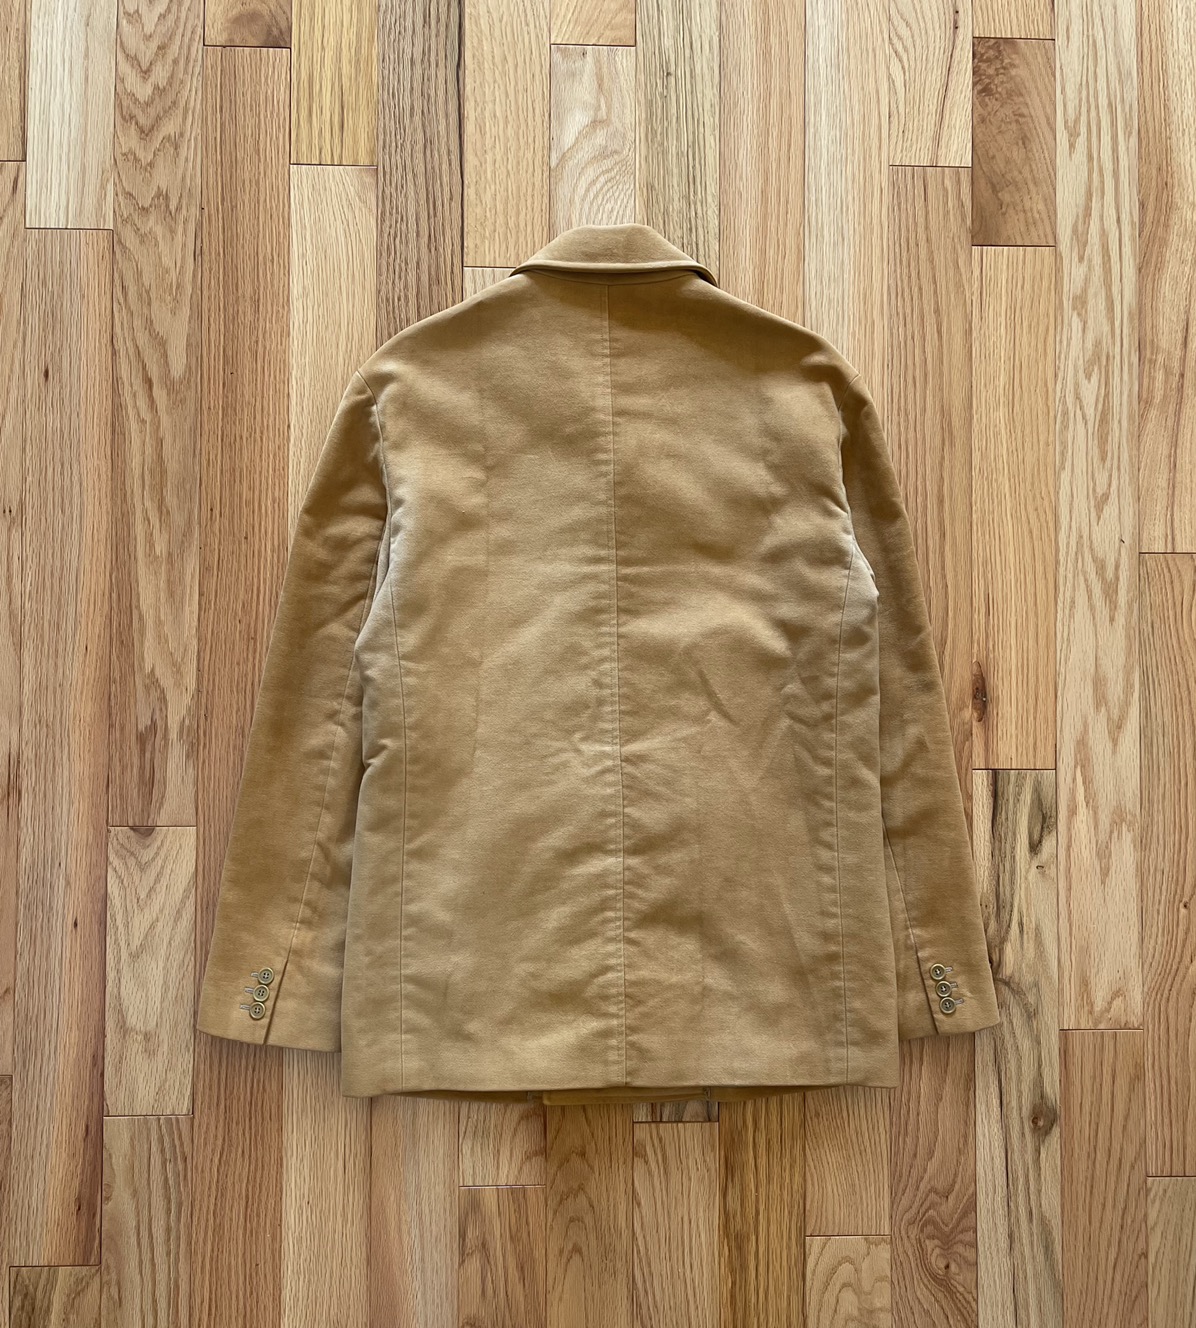 Early 2000s Helmut Lang Suede Double Breasted Peacoat - 5